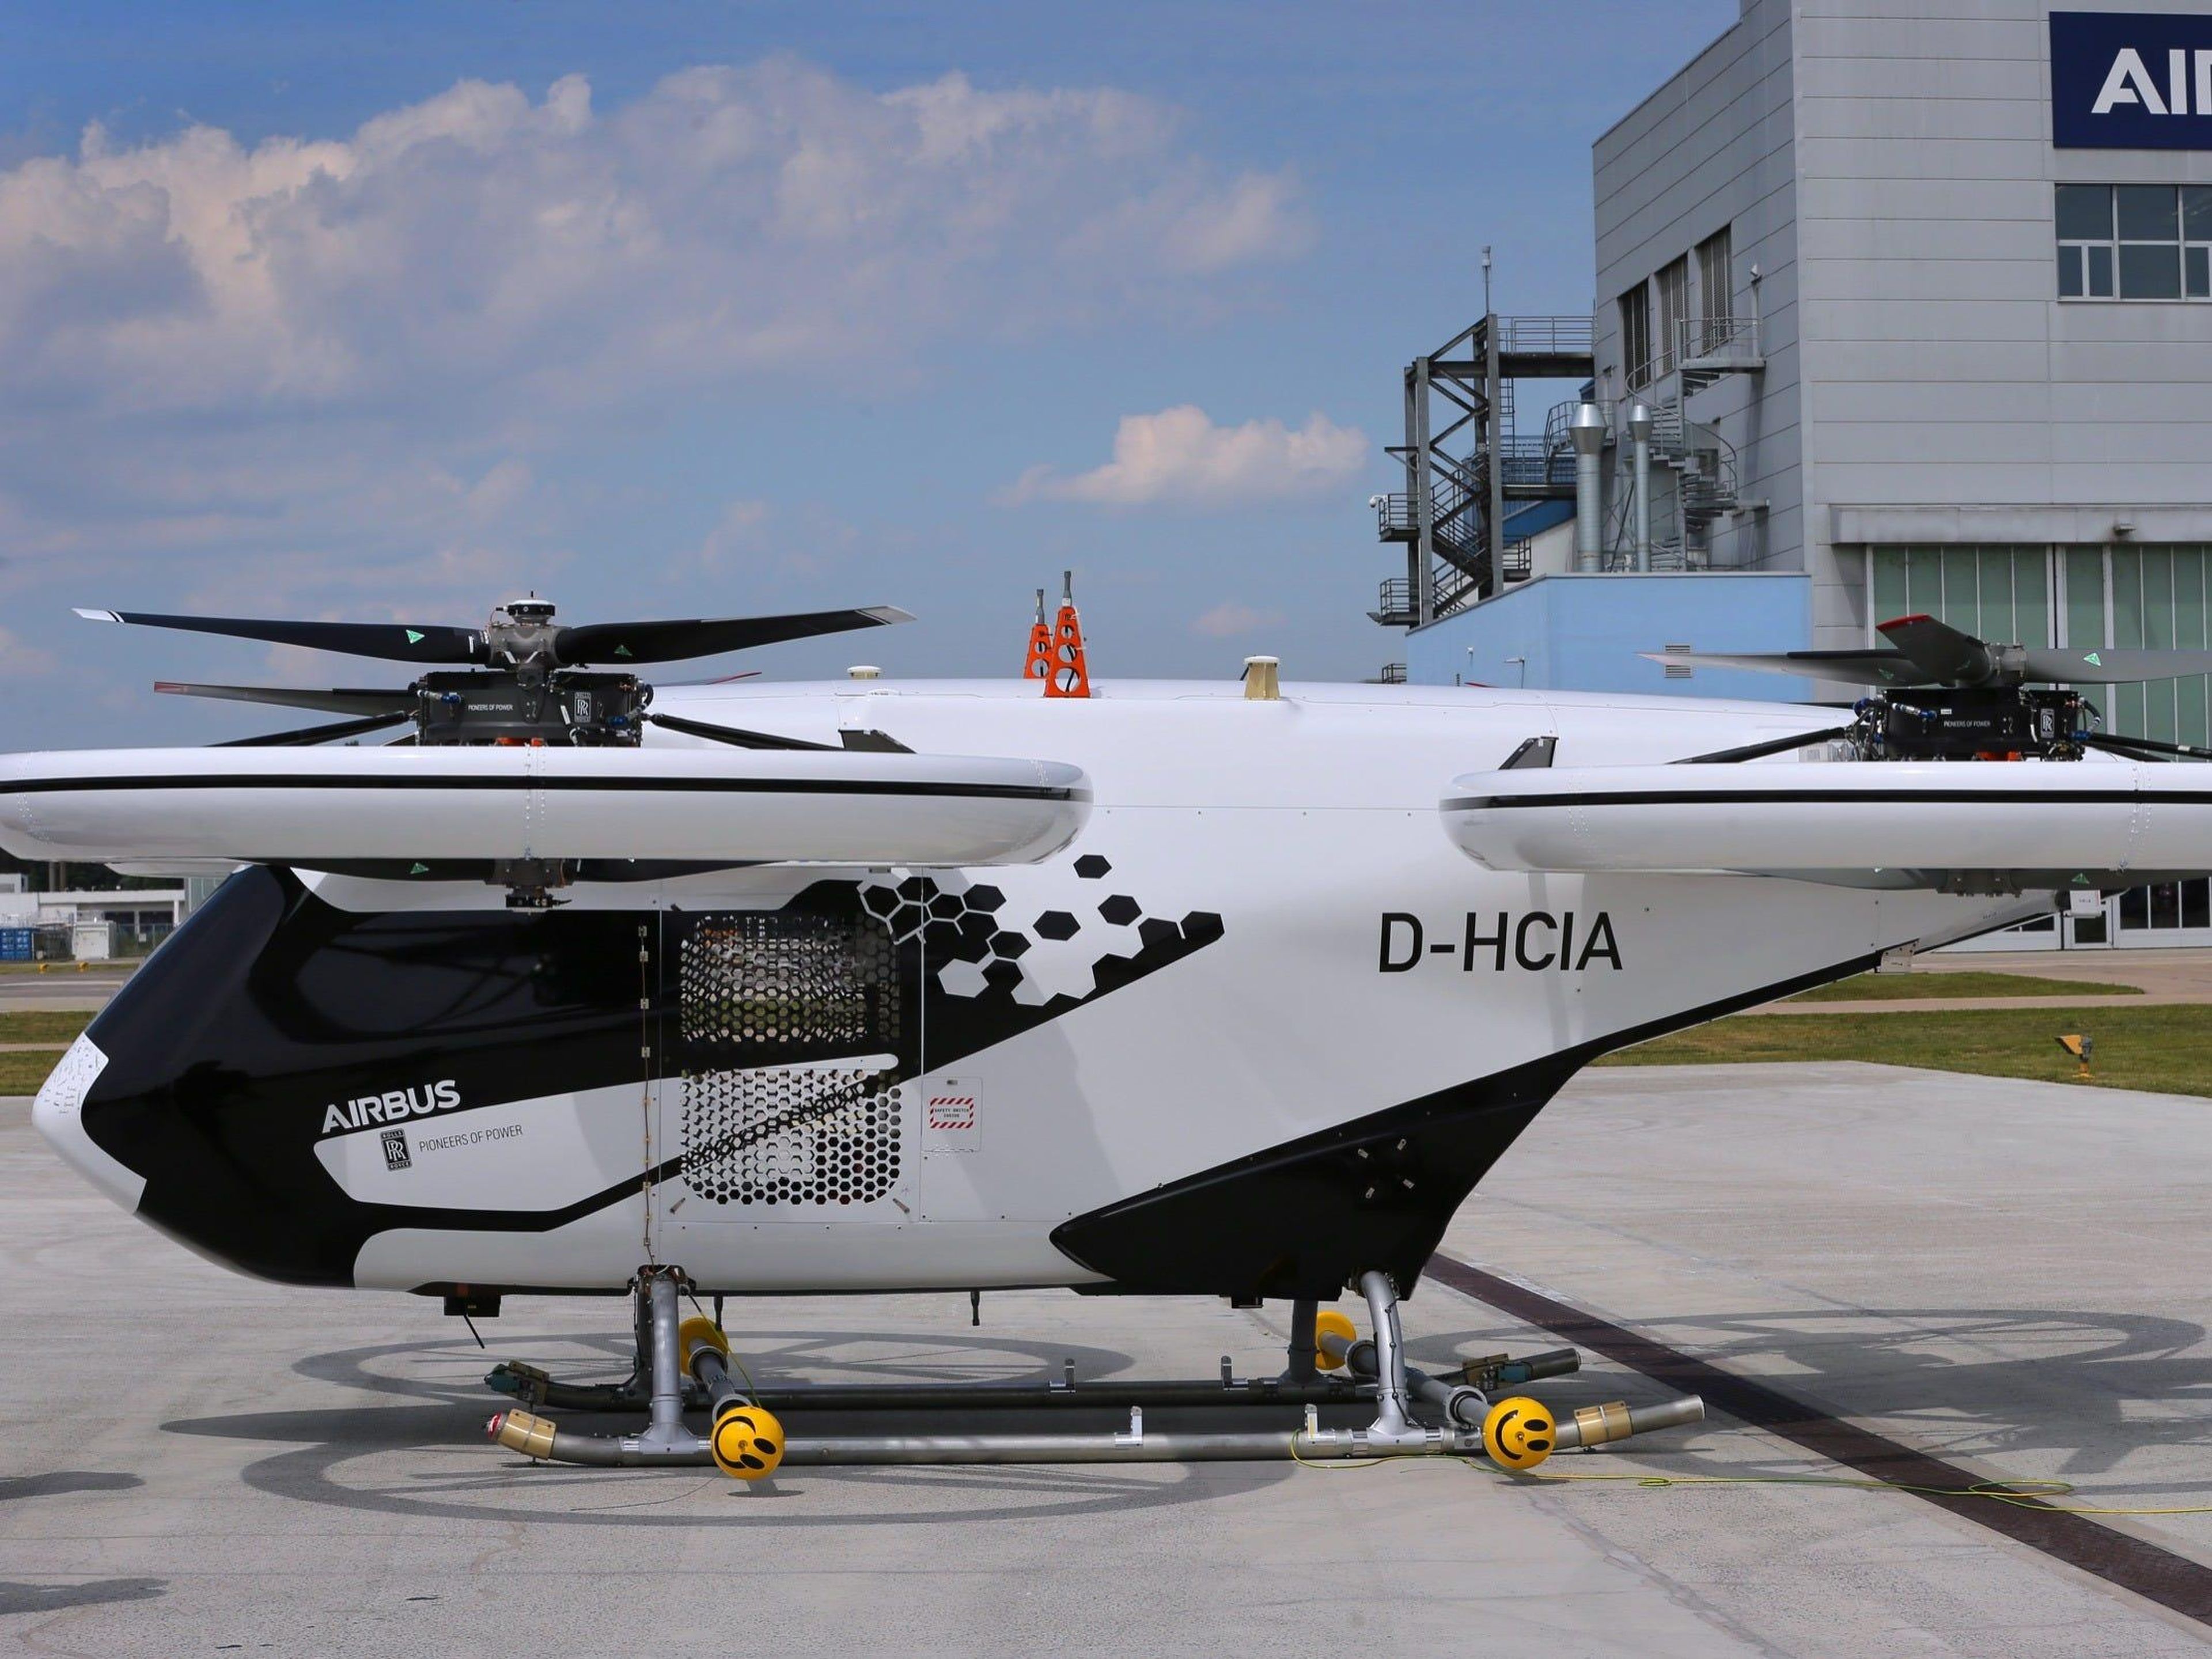 The eVTOL, registered as D-HCIA, didn't leave the Airbus facility on either occasion but the flights are important milestones on the way to certification.